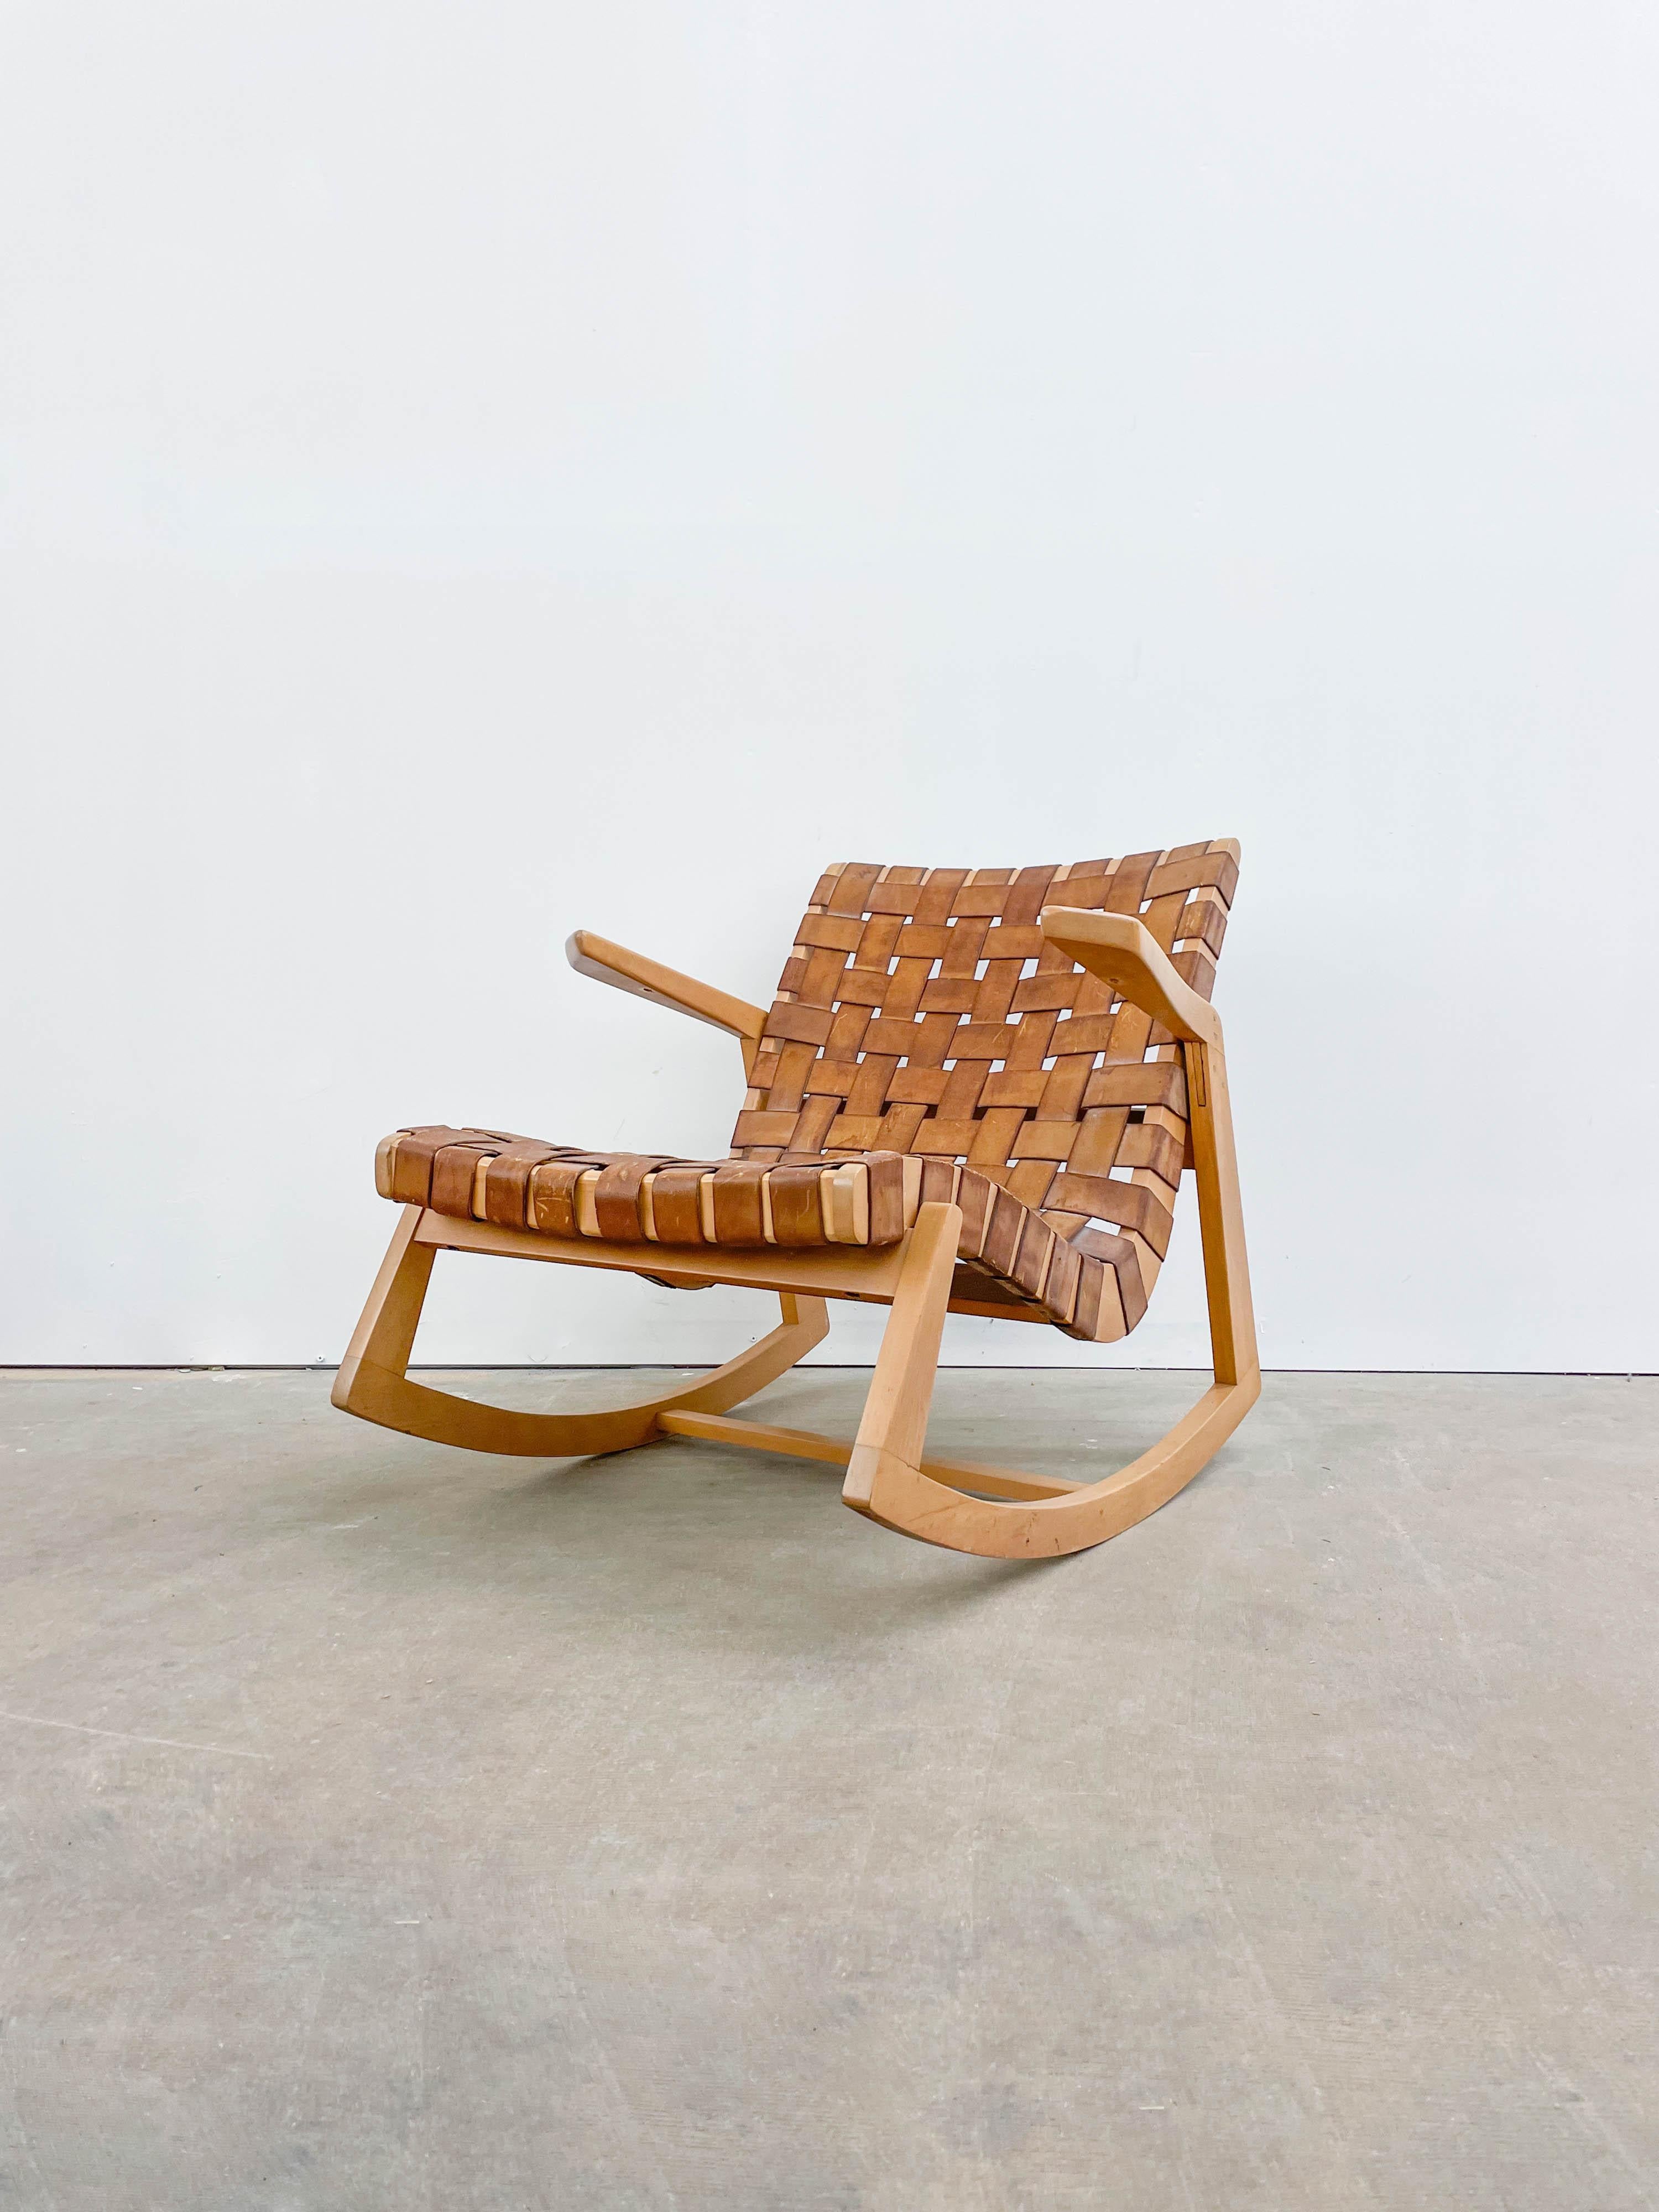 This is a rare first year production from HG Knoll Associates of a stunning rocking chair designed by Ralph Rapson. It boasts a solid birch frame with original woven leather webbing showing great patina. This particular chair comes from an